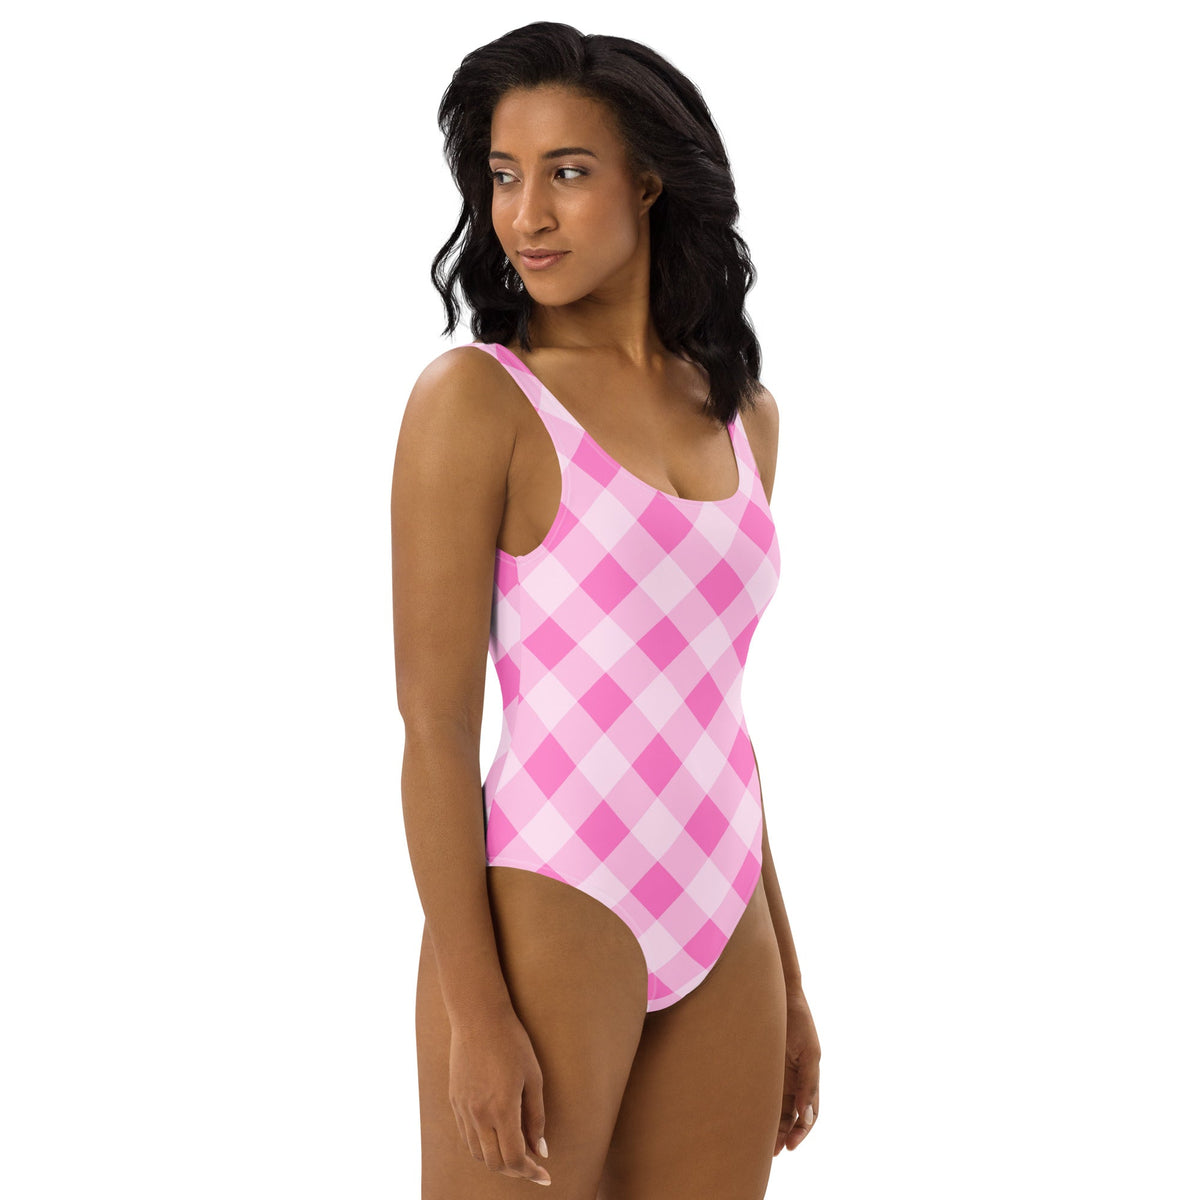 FLORIDA ECO ONE PIECE SWIMSUIT - PINK GINGHAM